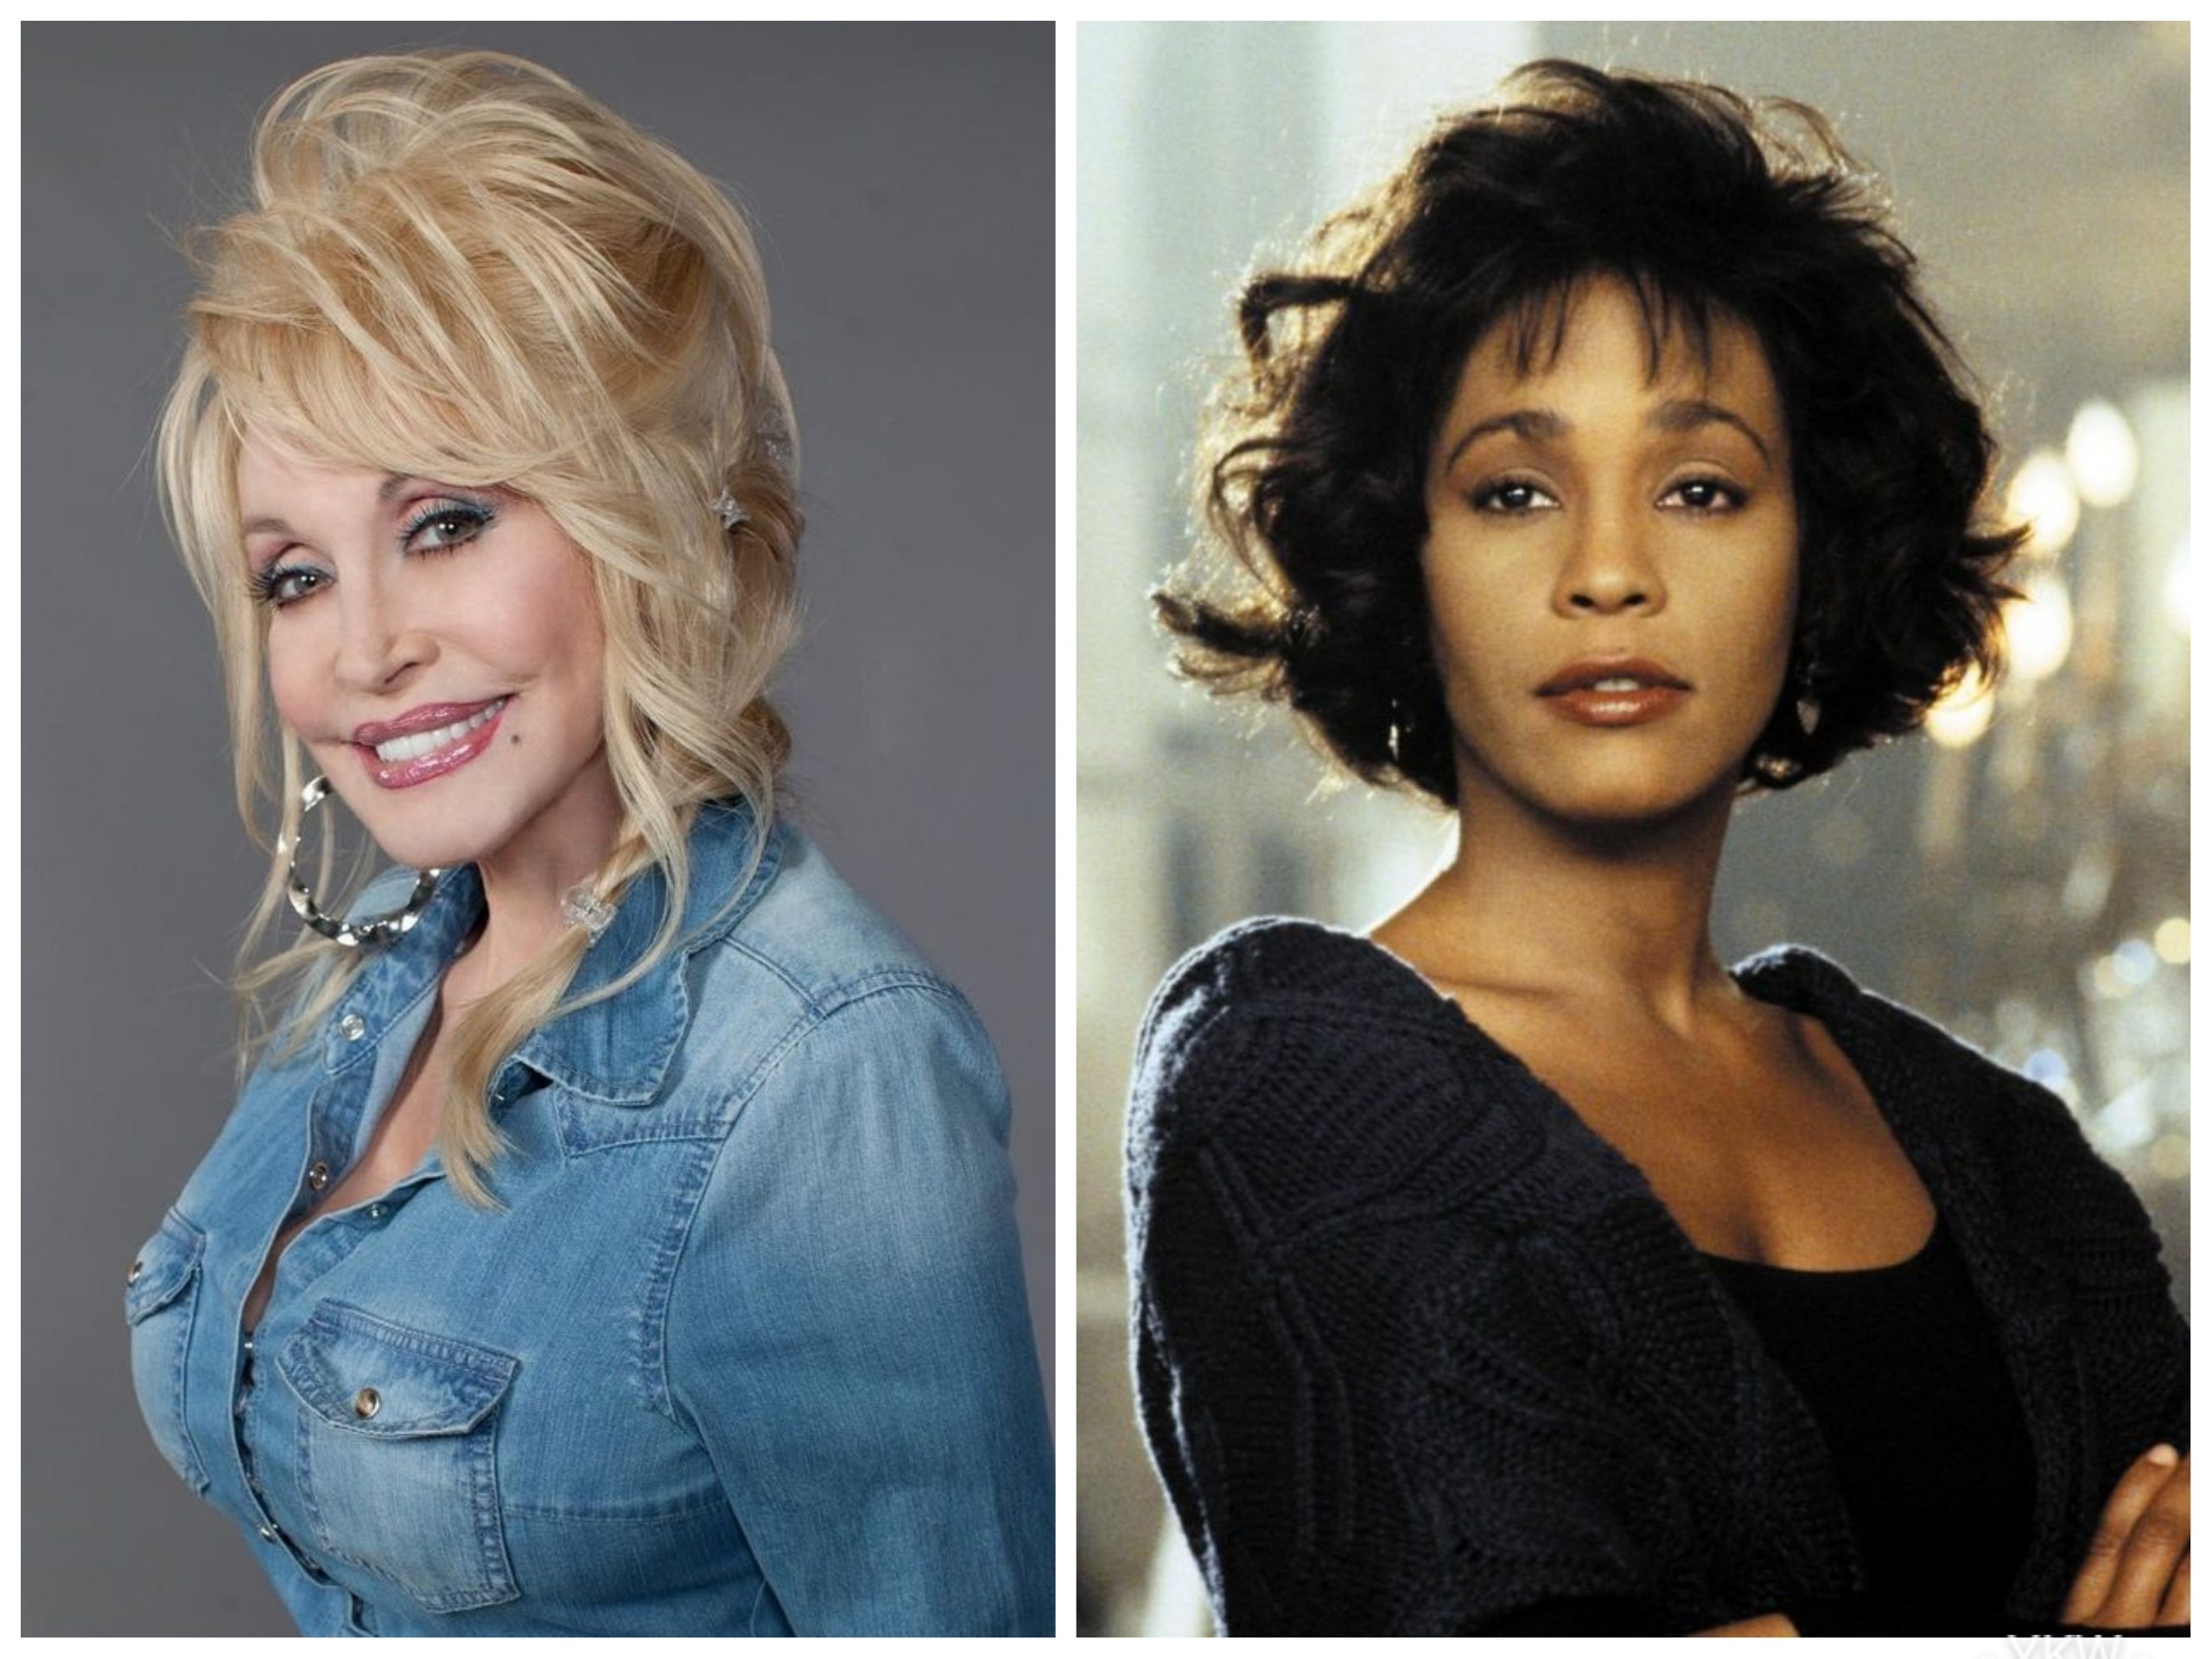 Dolly Parton Invested Royalties From Whitney Houston’s Cover Of “I Will Always Love You” Into The Black Community